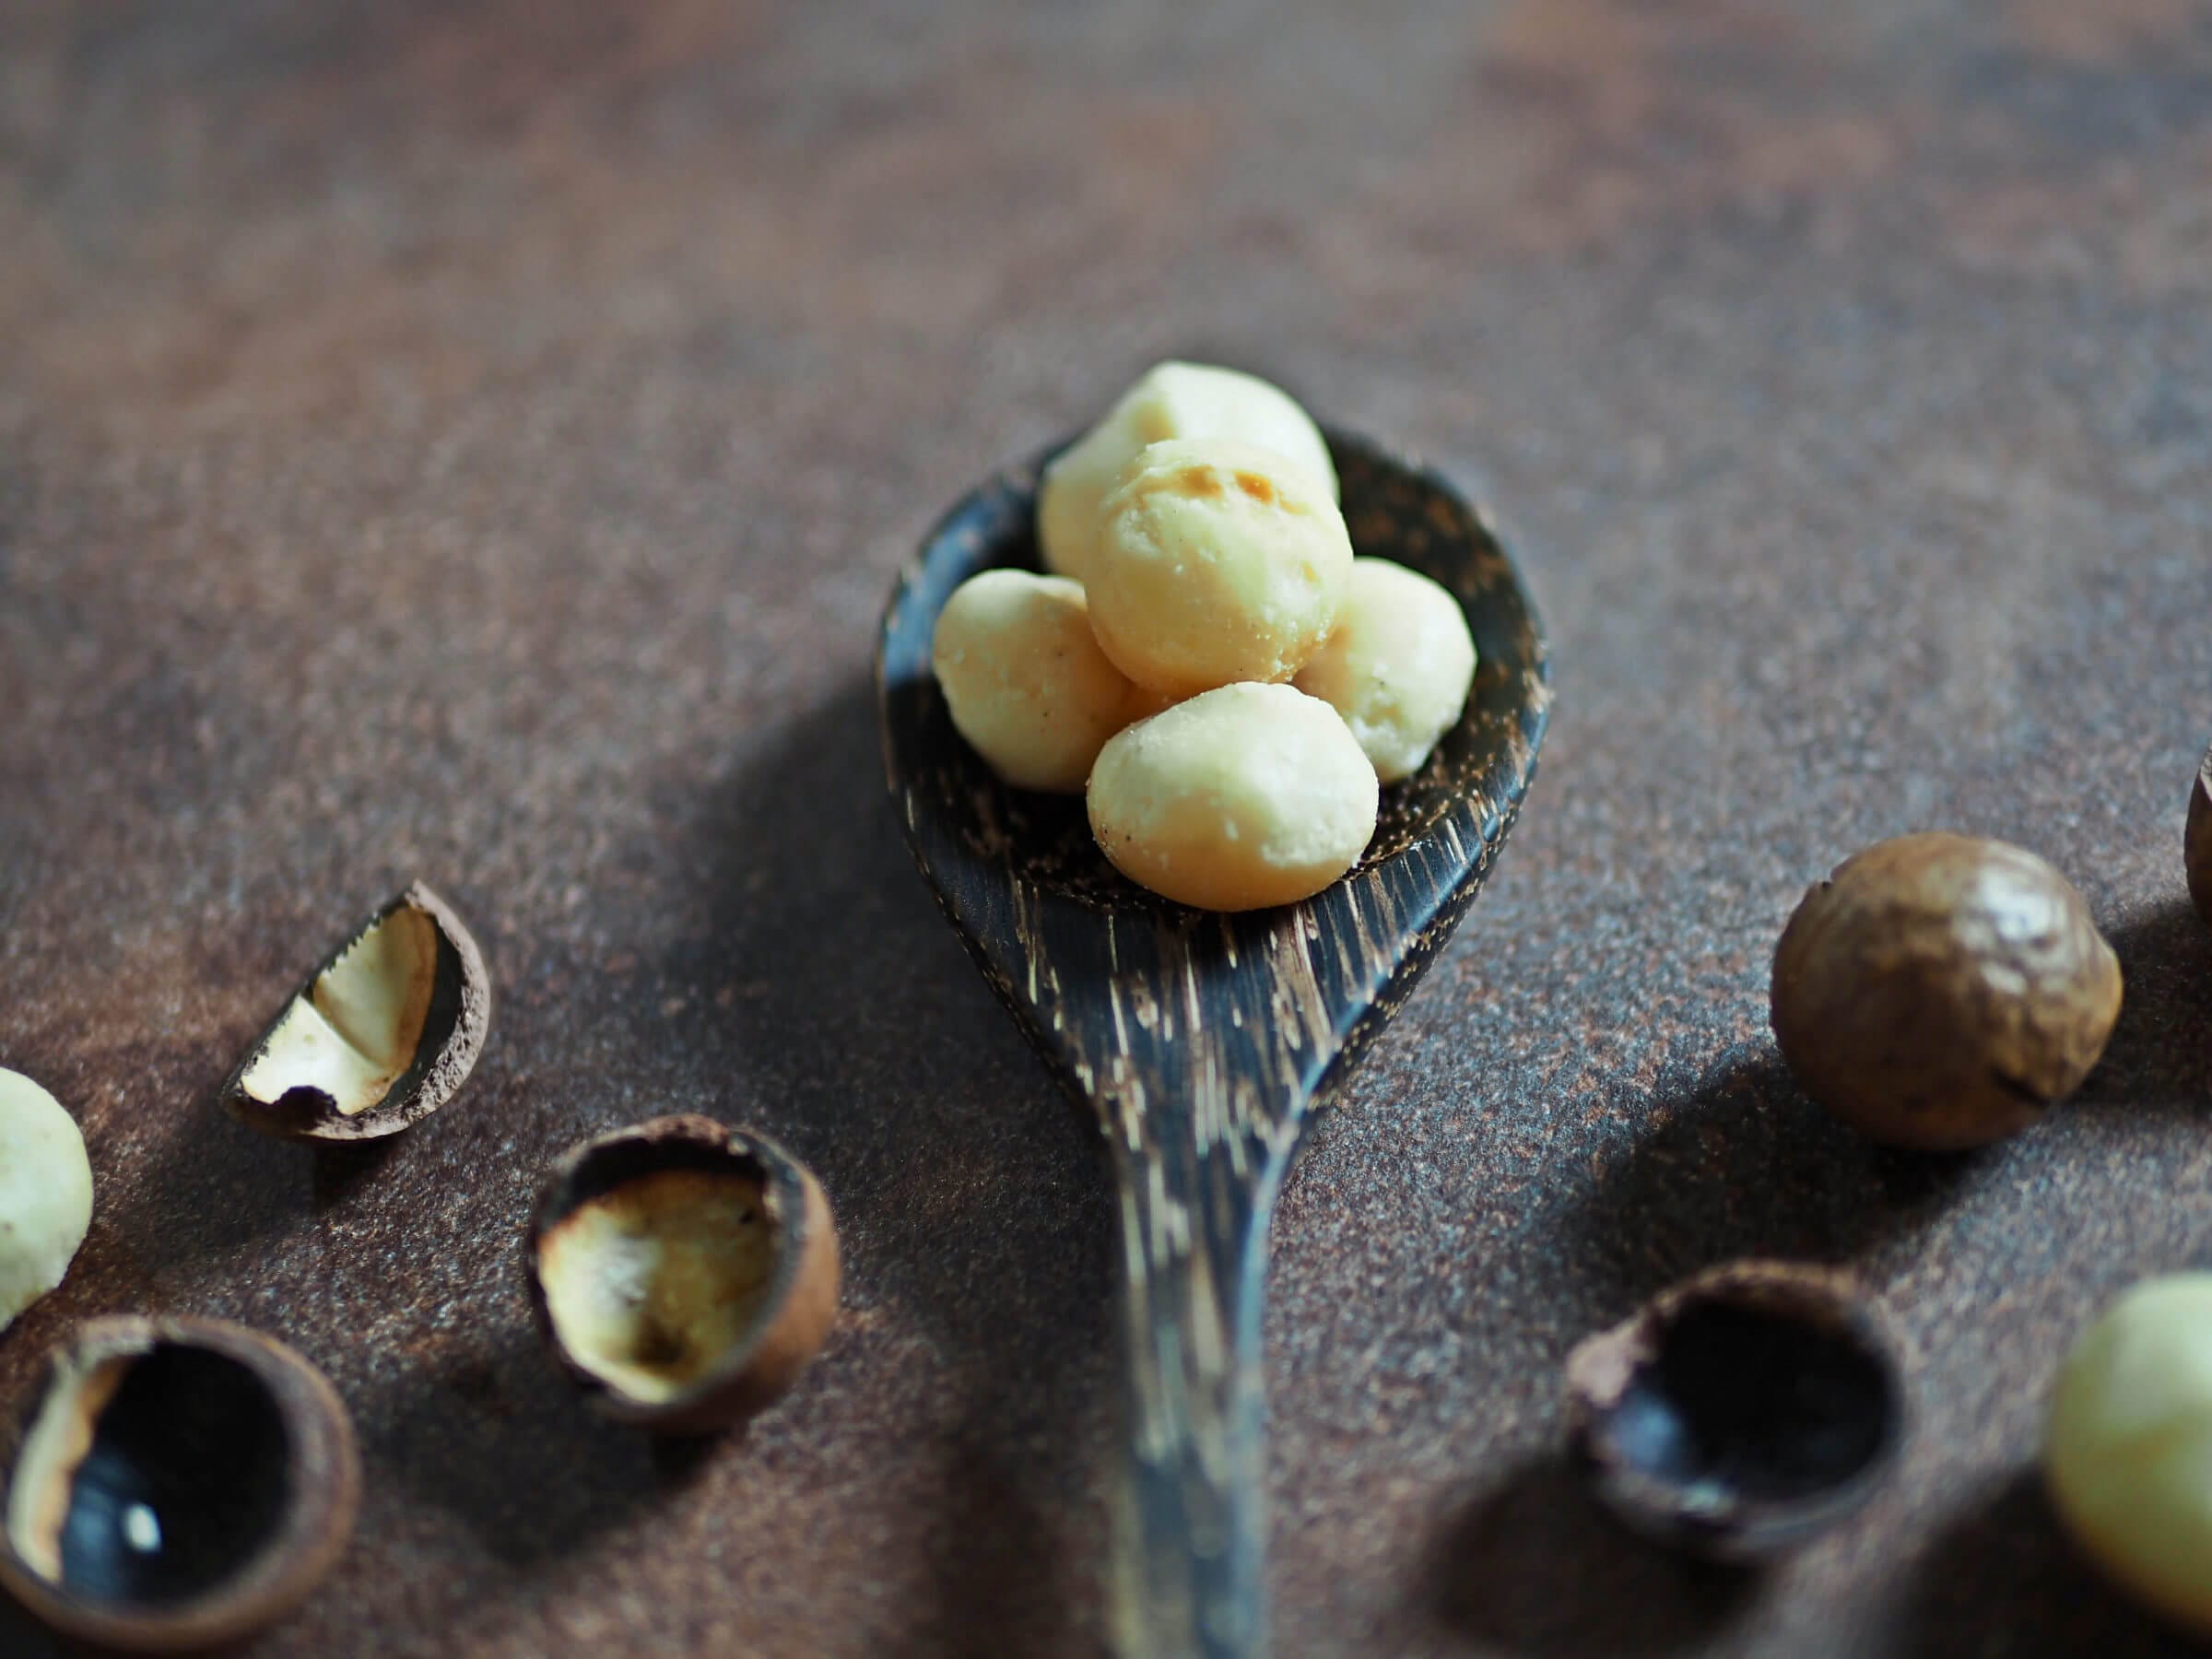 Macadamia nuts are one of the most keto-friendly options